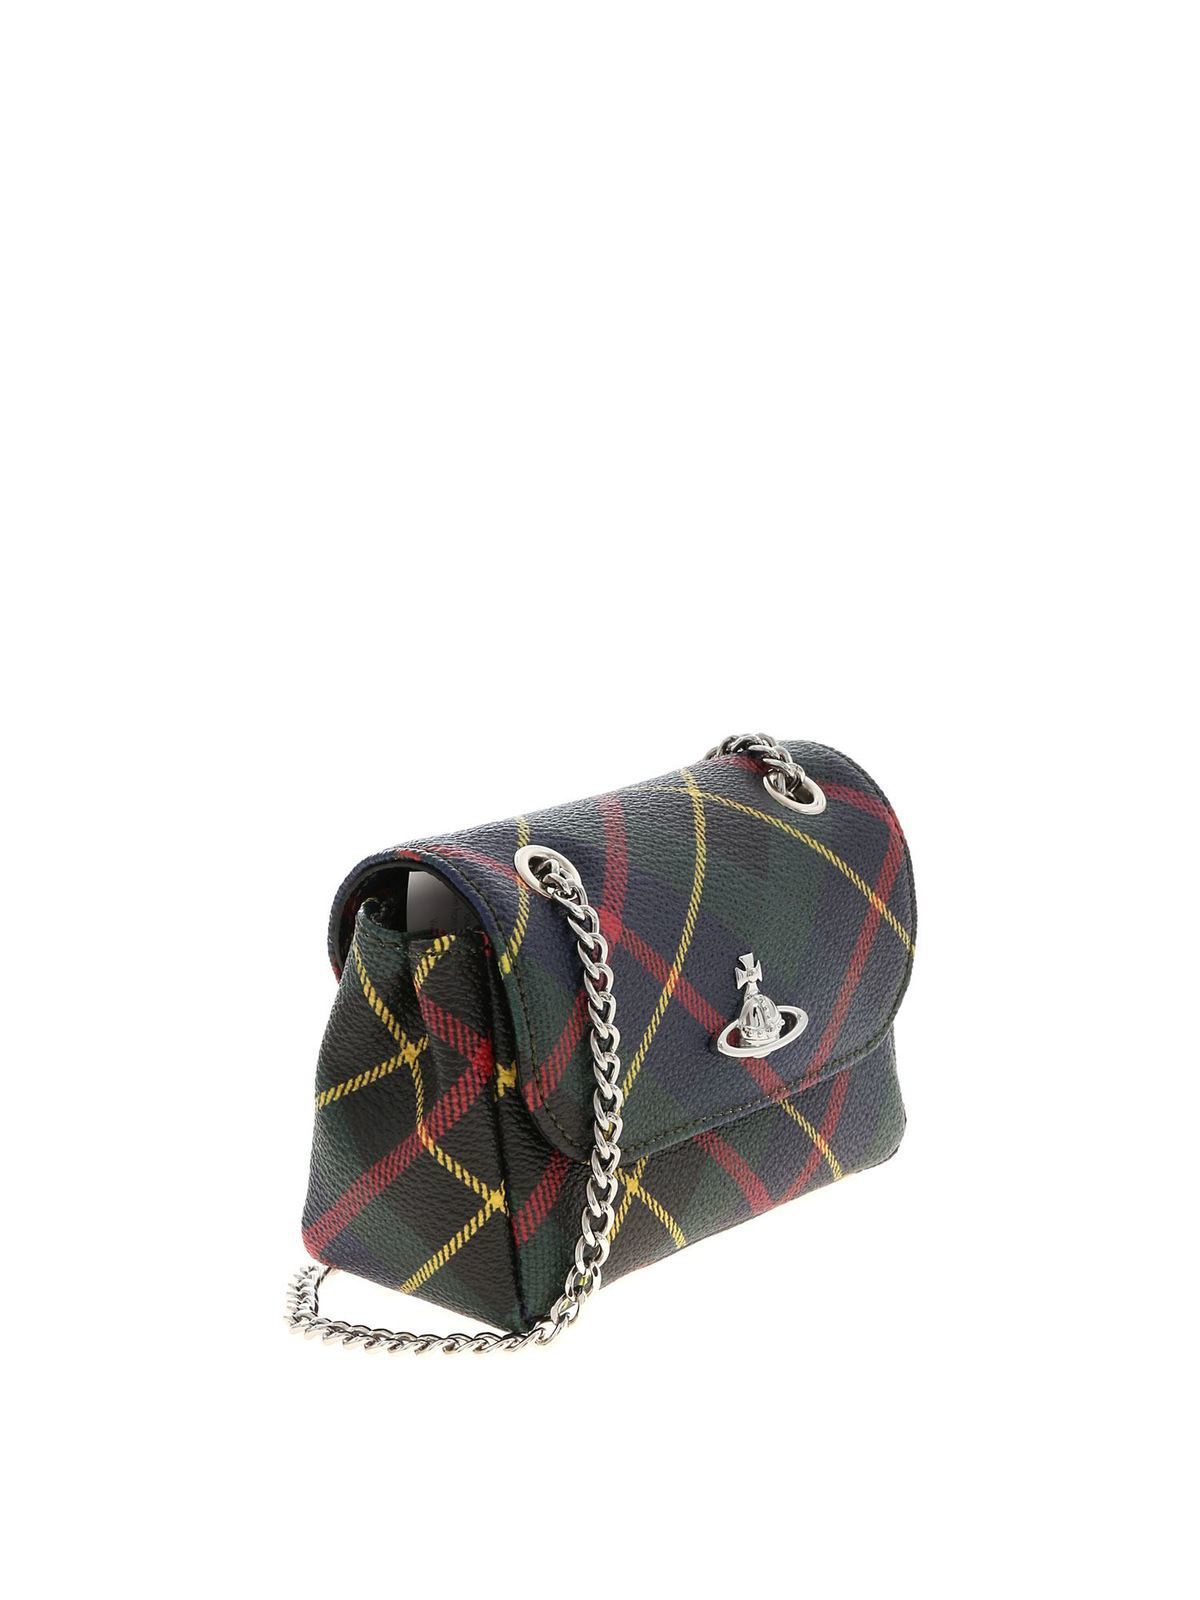 Vivienne Westwood Small Purse with Chain Bag Leather Black Mini Bag ORB Logo